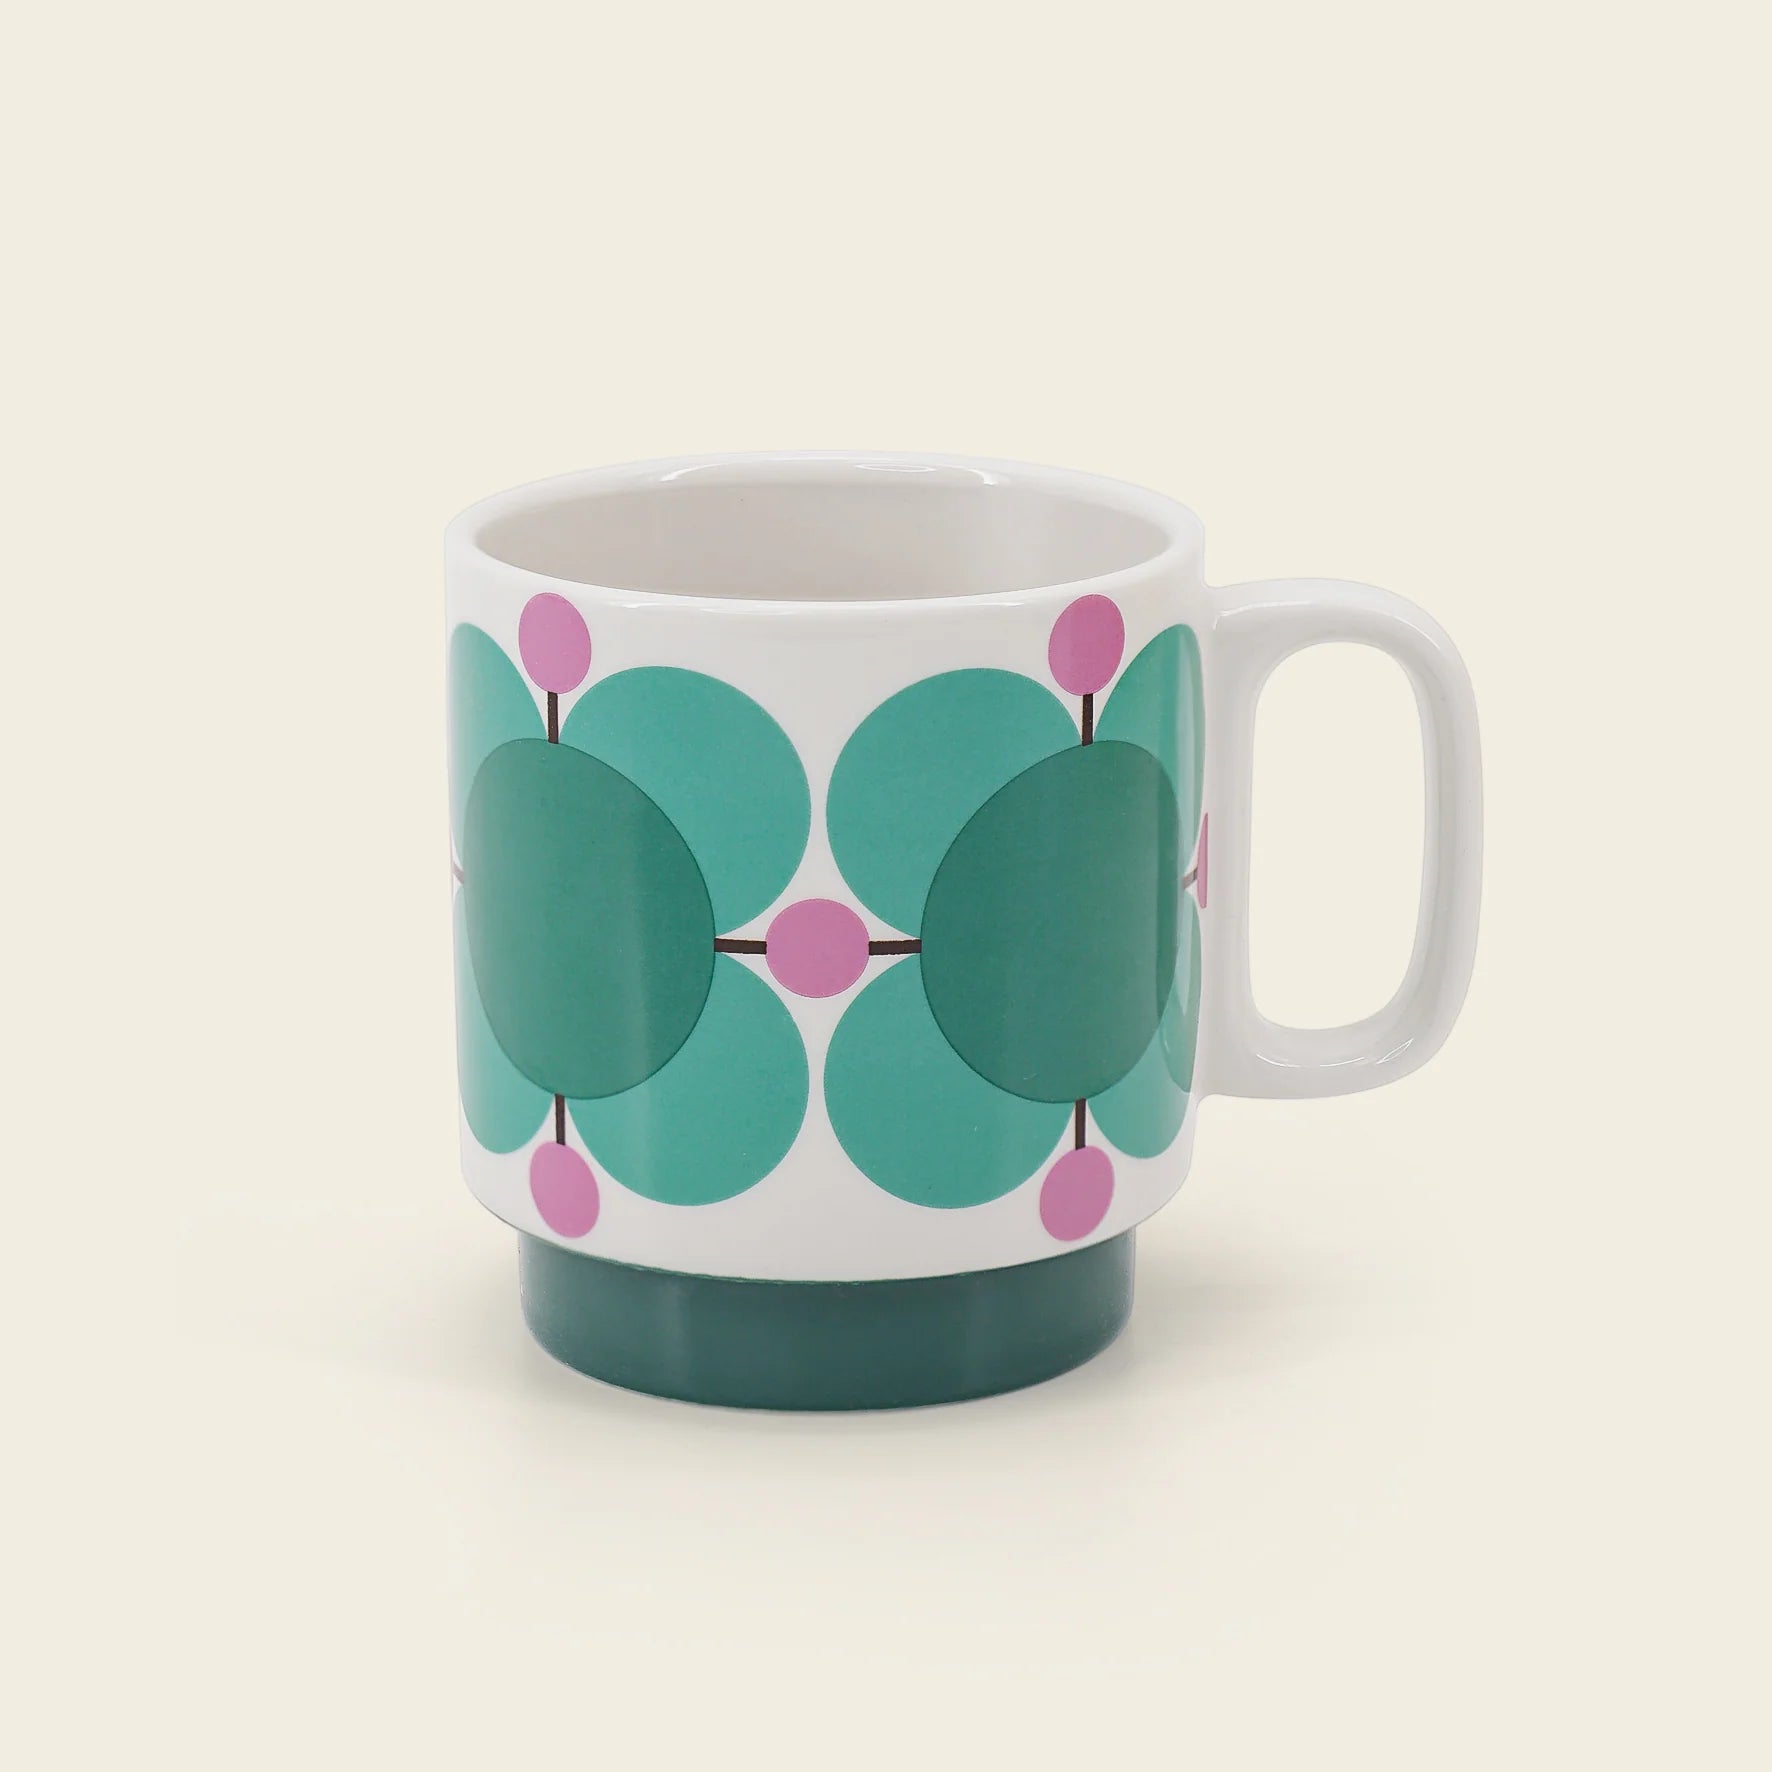 Fab Gifts | Orla Kiely Atomic Flower Stacking Mugs Set of 6 by Weirs of Baggot Street